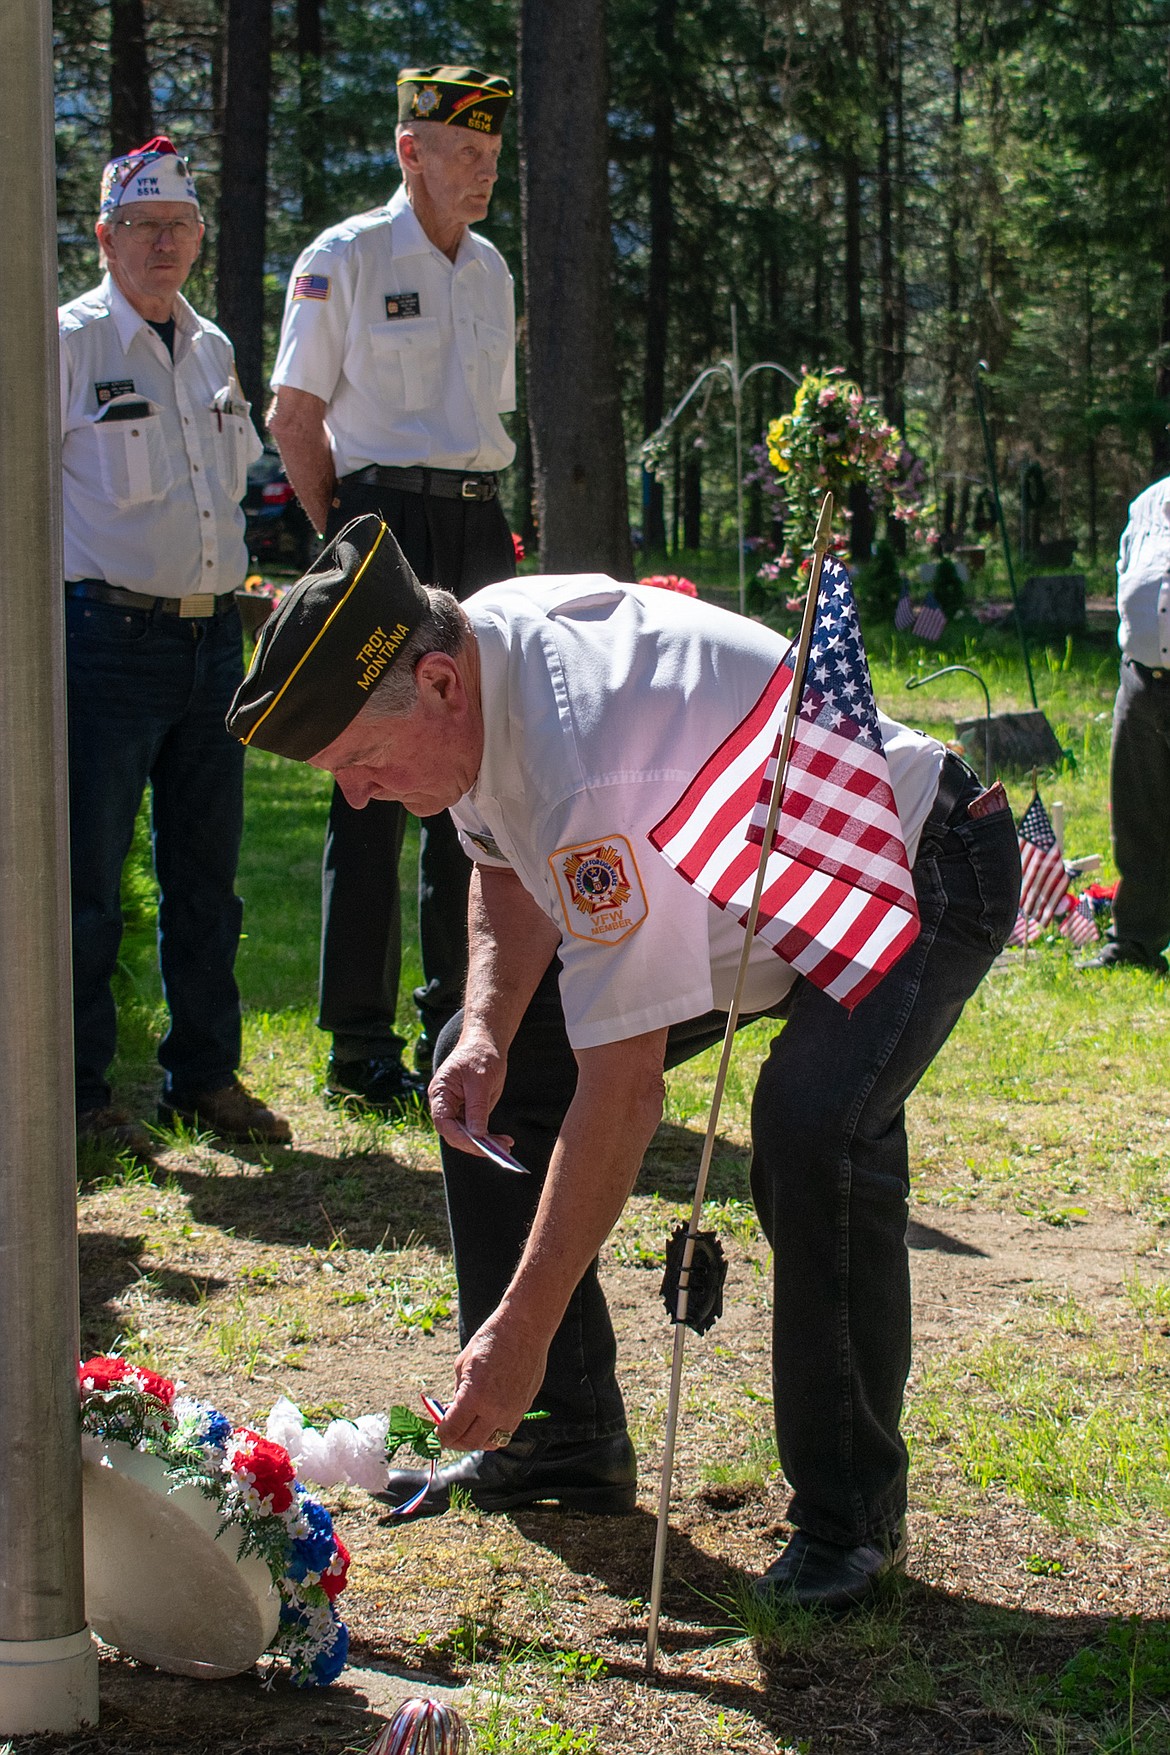 On Monday, VFW John E. Freeman Post 5514 Junior Vice Commander Mike Casey places white flowers symbolizing purity and the hope that, &#147;May each future generation emulate the unselfish courage of all men and women who fought for freedom.&#148; (Ben Kibbey/The Western News)